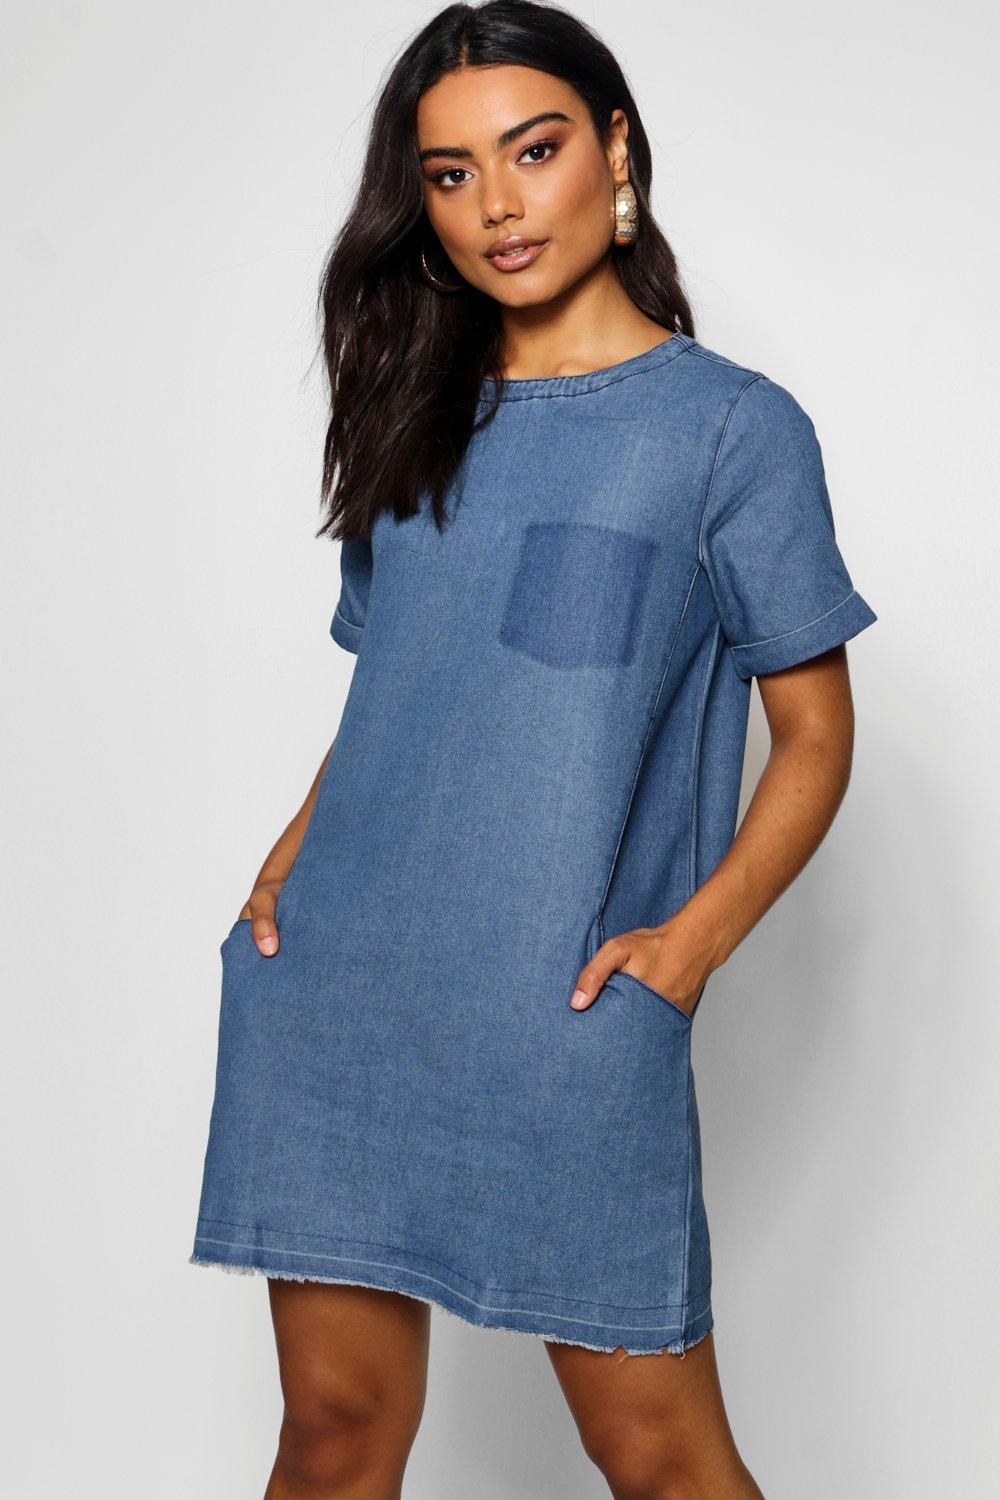 25 Cheap Dresses With Pockets You'll ...